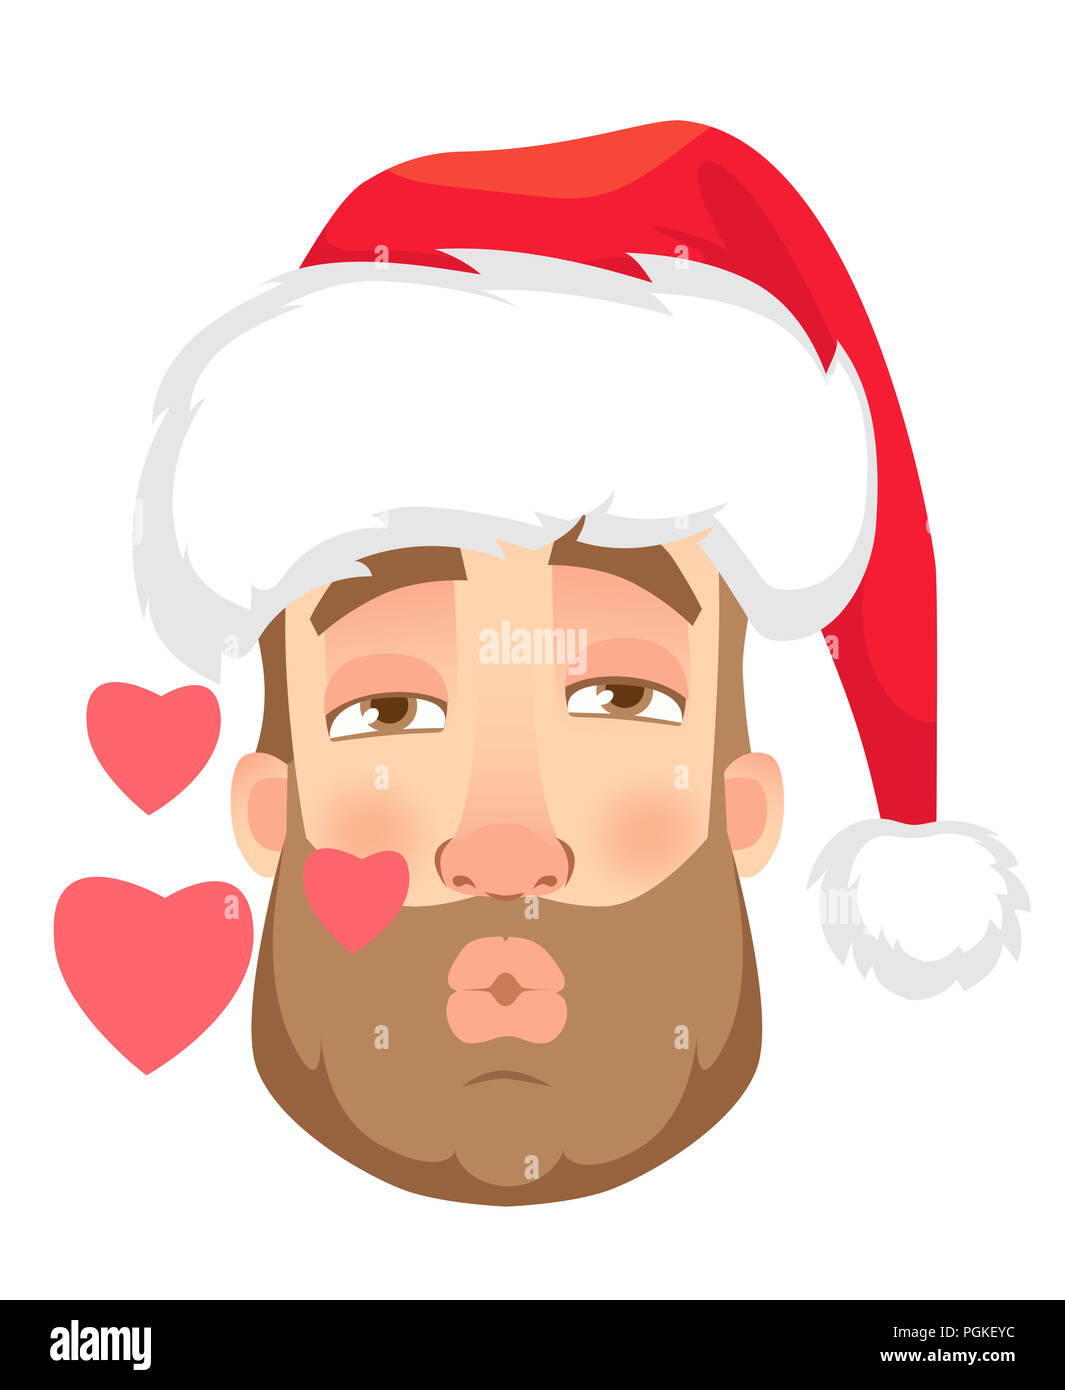 Head of a man in a Santa Claus hat. Man face expression. Human emotions. Set of cartoon illustrations. Enamored Stock Photo